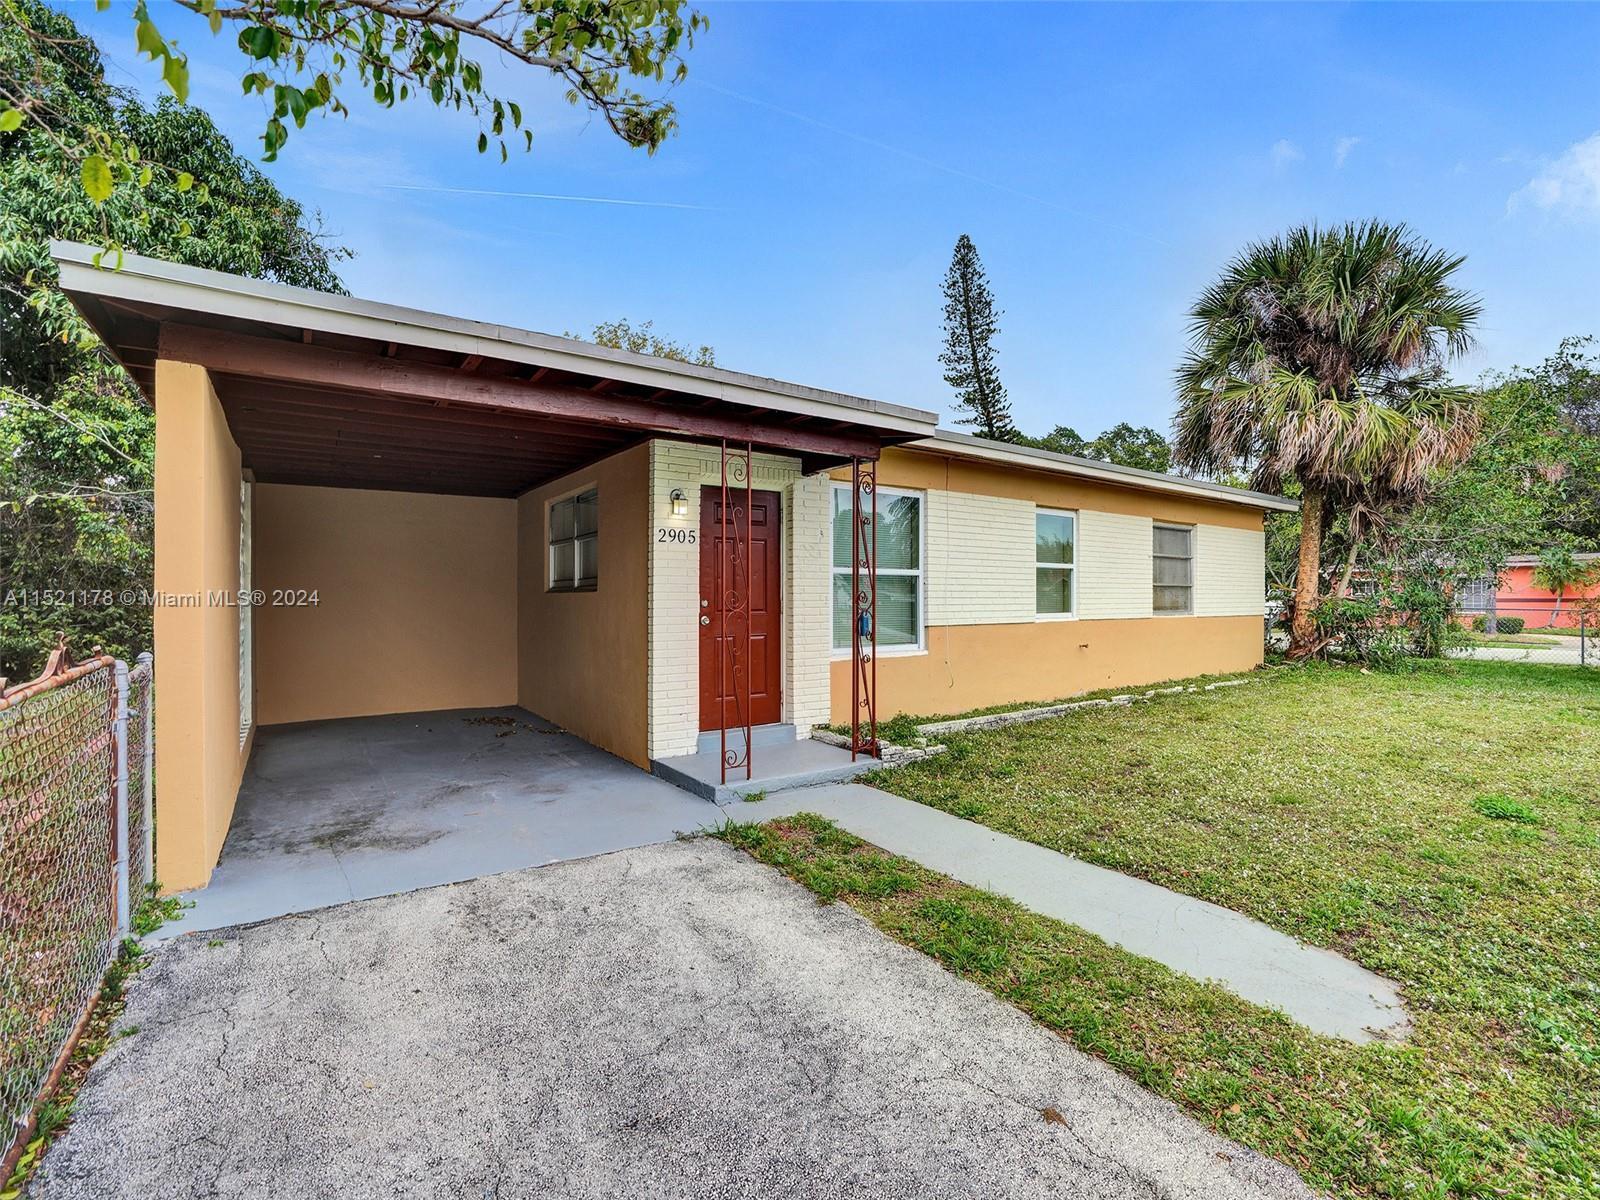 Nice single family home, 3 bedrooms and 1 bathroom centrally located in Fort Lauderdale. The propert